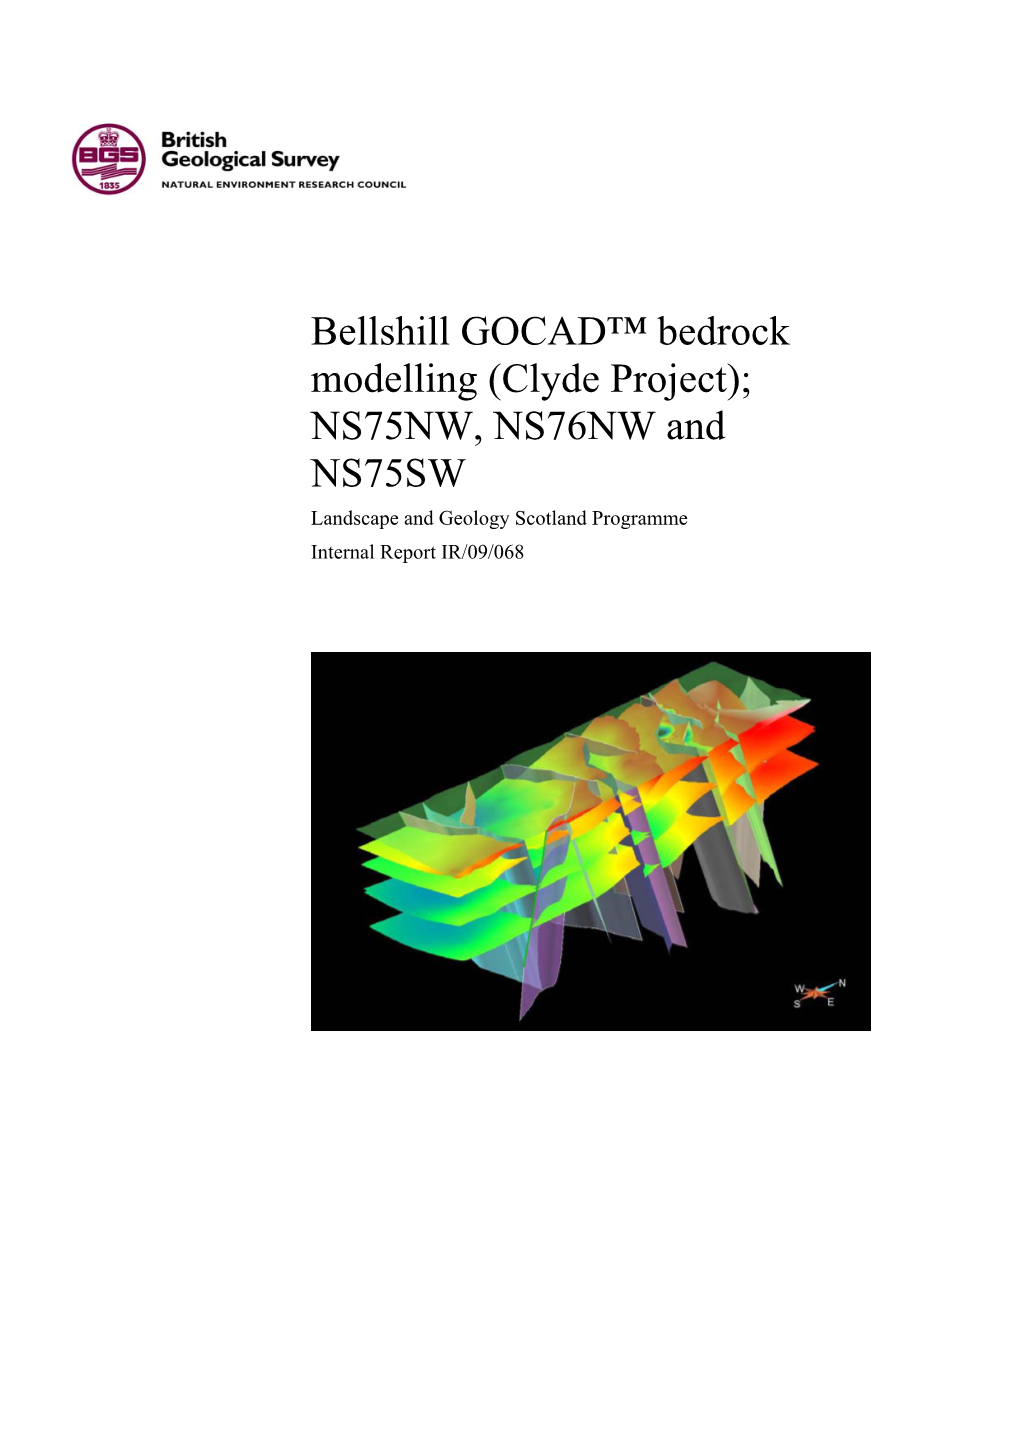 Bellshill GOCAD™ Bedrock Modelling (Clyde Project); NS75NW, NS76NW and NS75SW Landscape and Geology Scotland Programme Internal Report IR/09/068